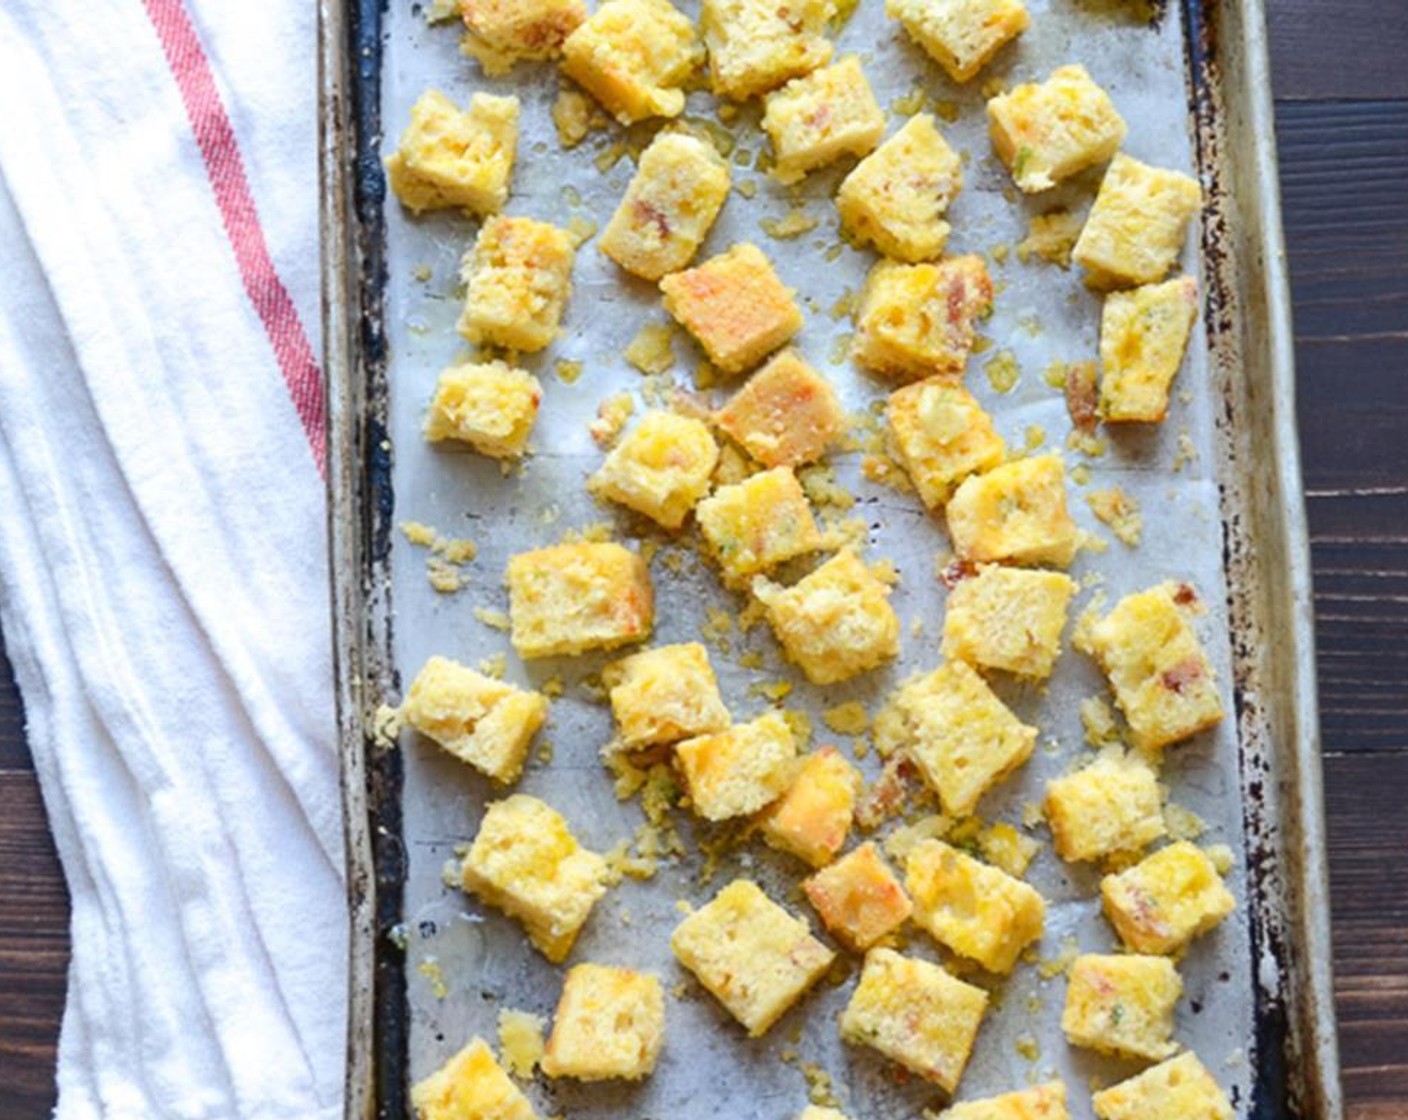 step 5 Cut the Cornbread (1 1/2 cups) into half-inch pieces. Place the cornbread on a cookie sheet and drizzle with the Olive Oil (2 Tbsp). Using your hands, toss the cornbread to coat with the olive oil. Bake for 7 to 8 minutes.